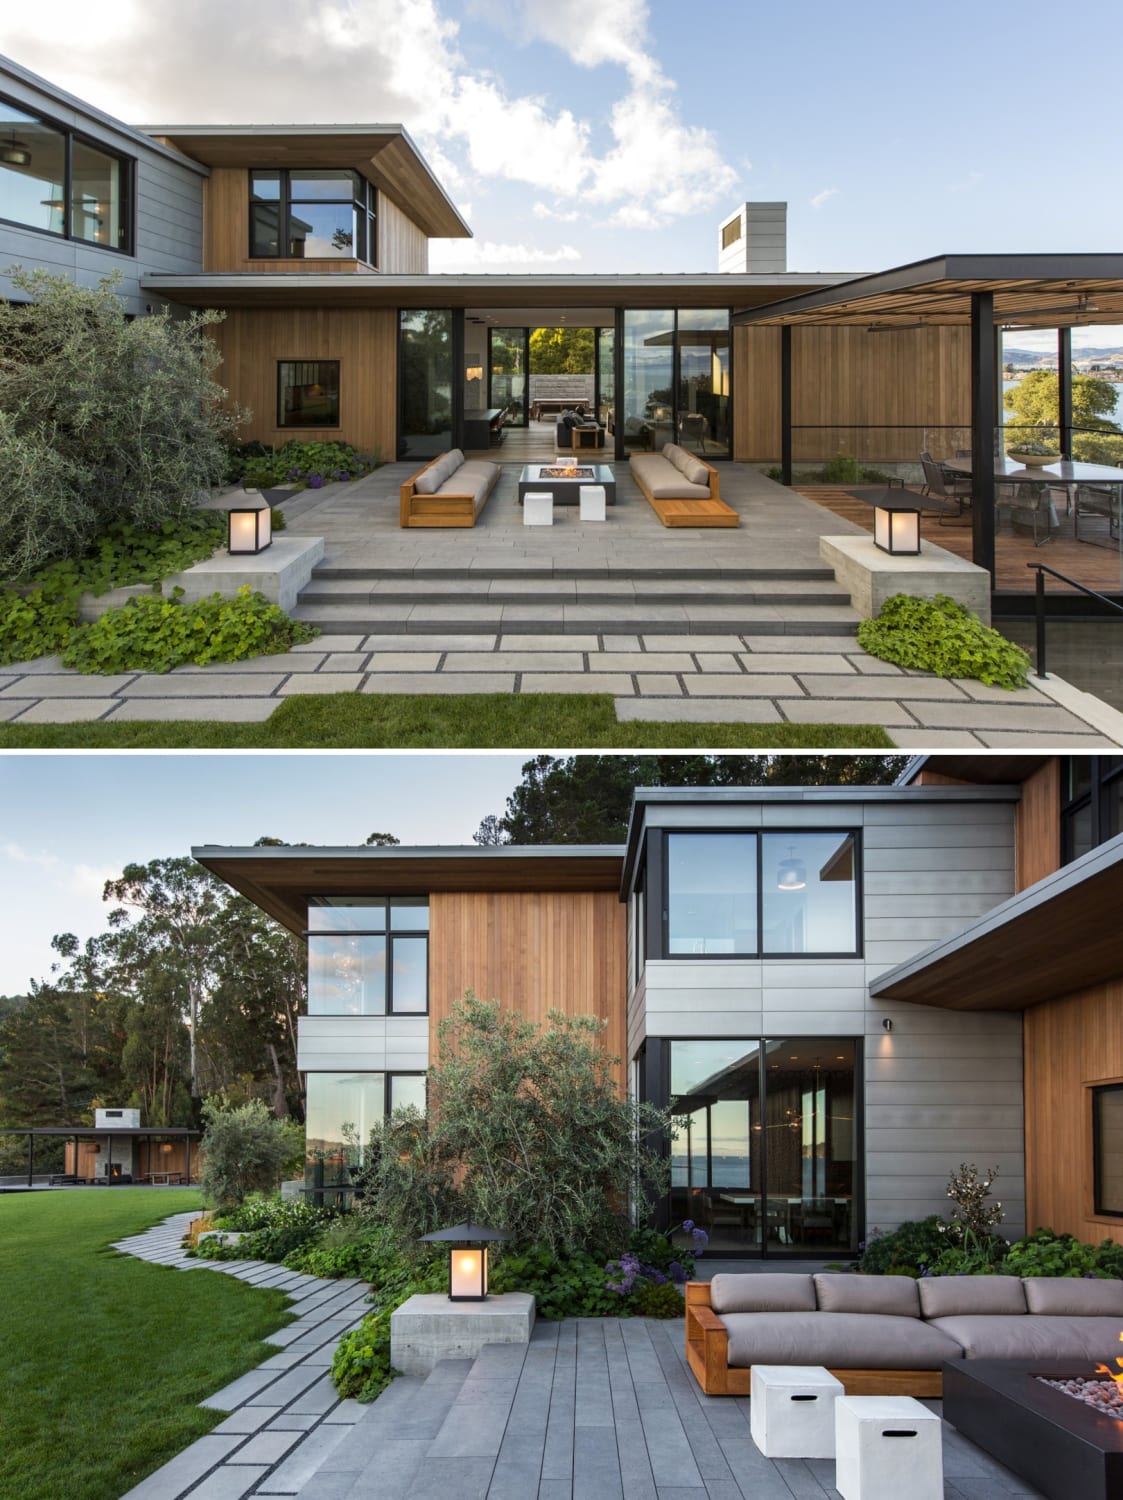 Residence on an east facing bluff of the Tiburon Peninsula overlooking the San Francisco Bay, Marin County, California by Walker Warner Architects (Photo: Laure Joliet)